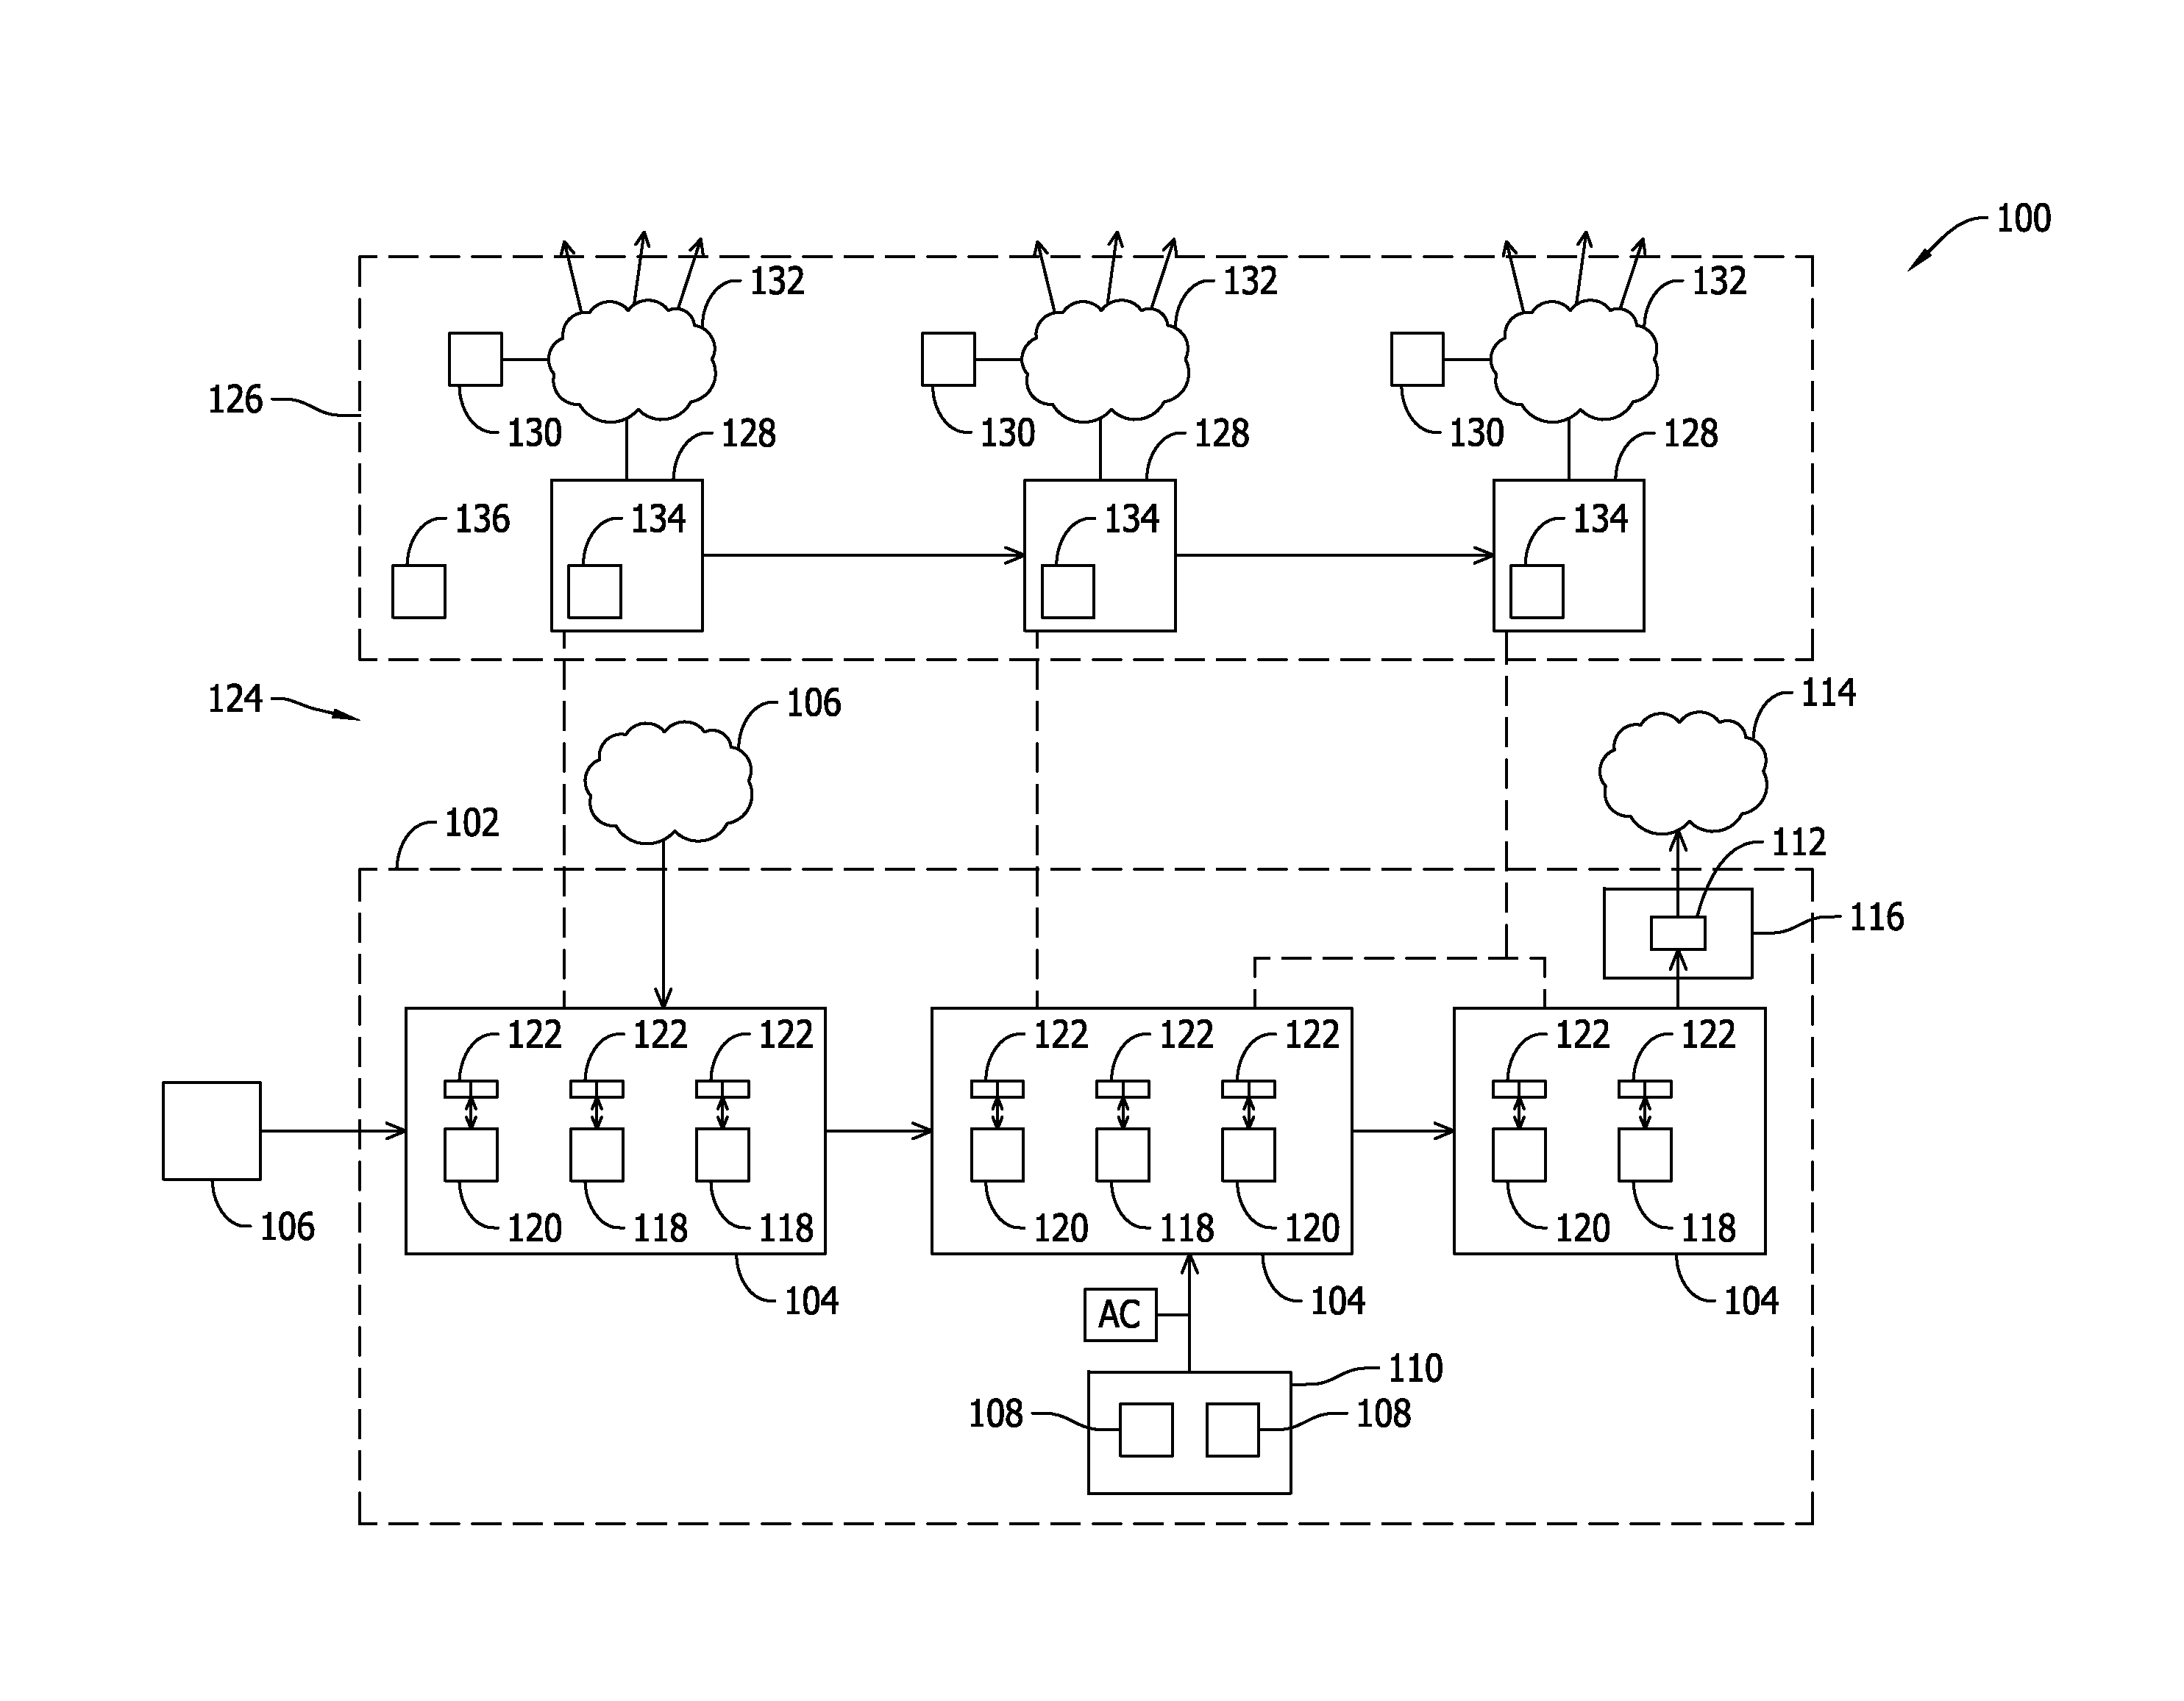 Methods and systems for intelligent enterprise bill-of-process with embedded cell for analytics